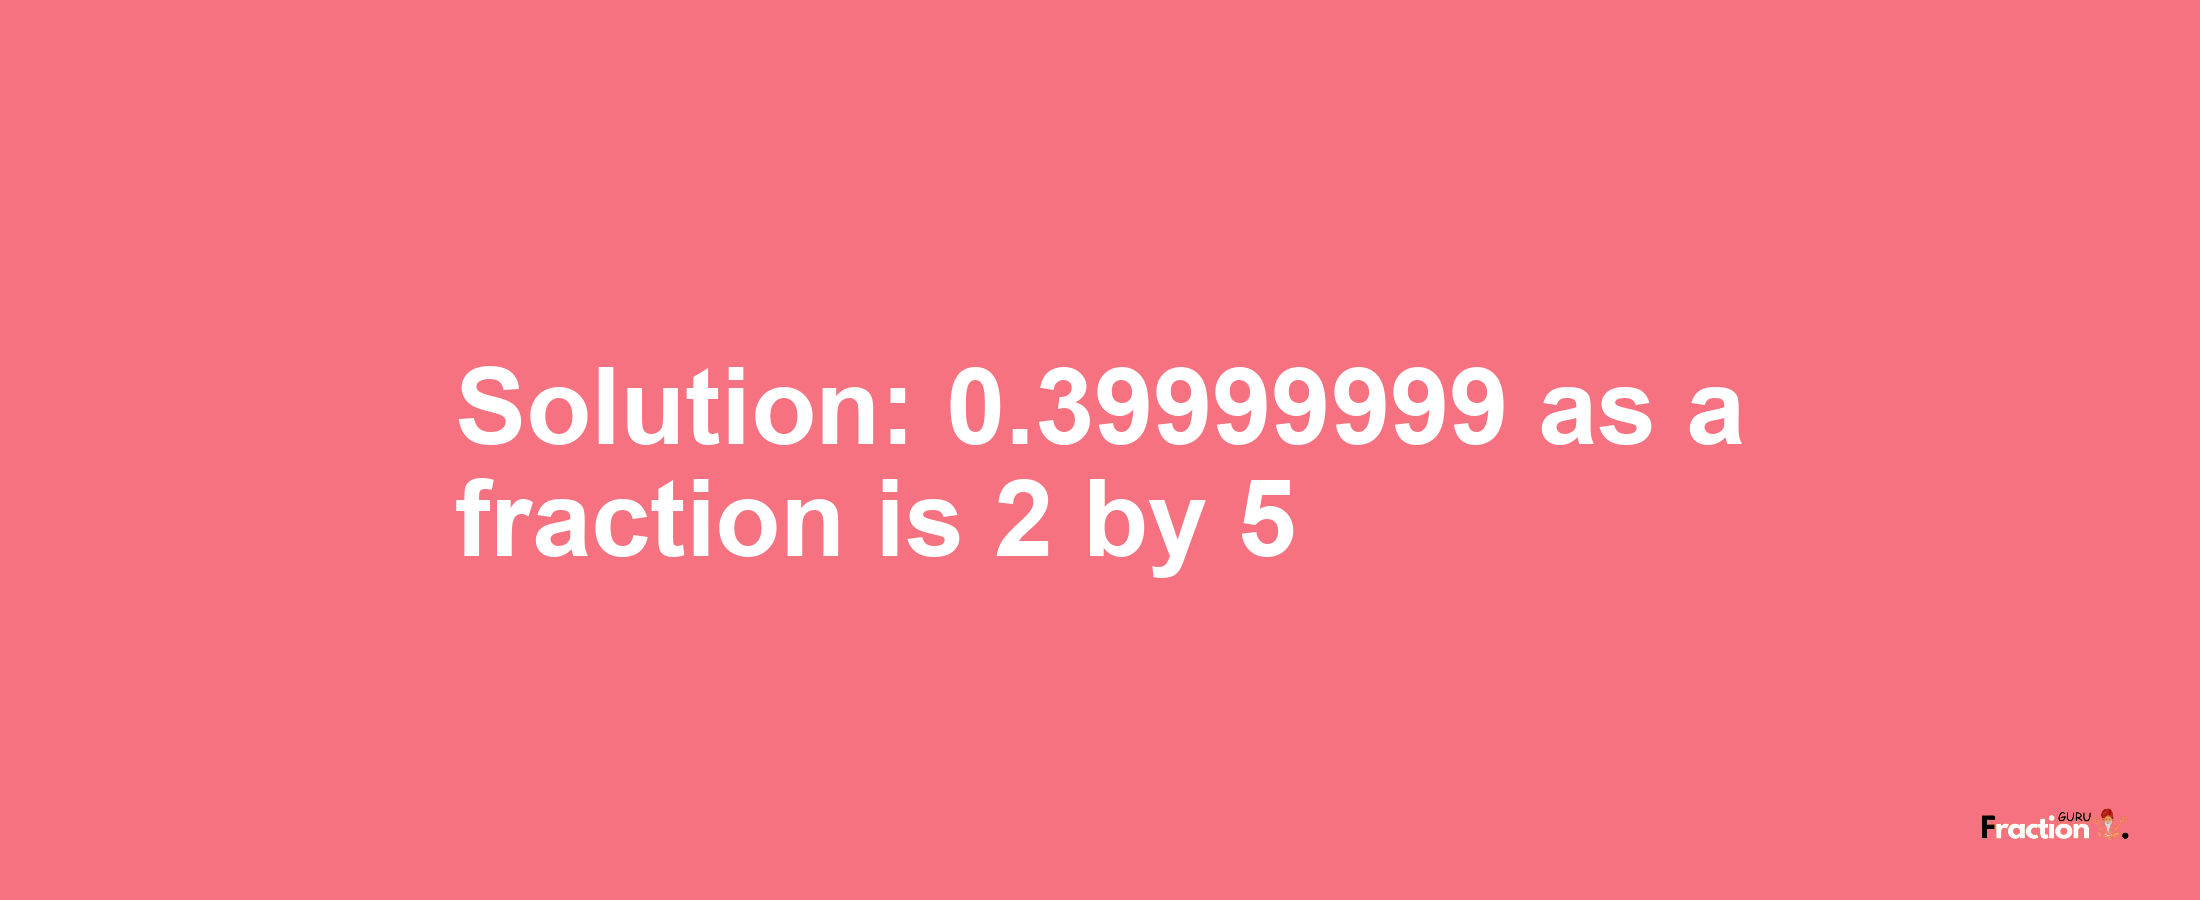 Solution:0.39999999 as a fraction is 2/5